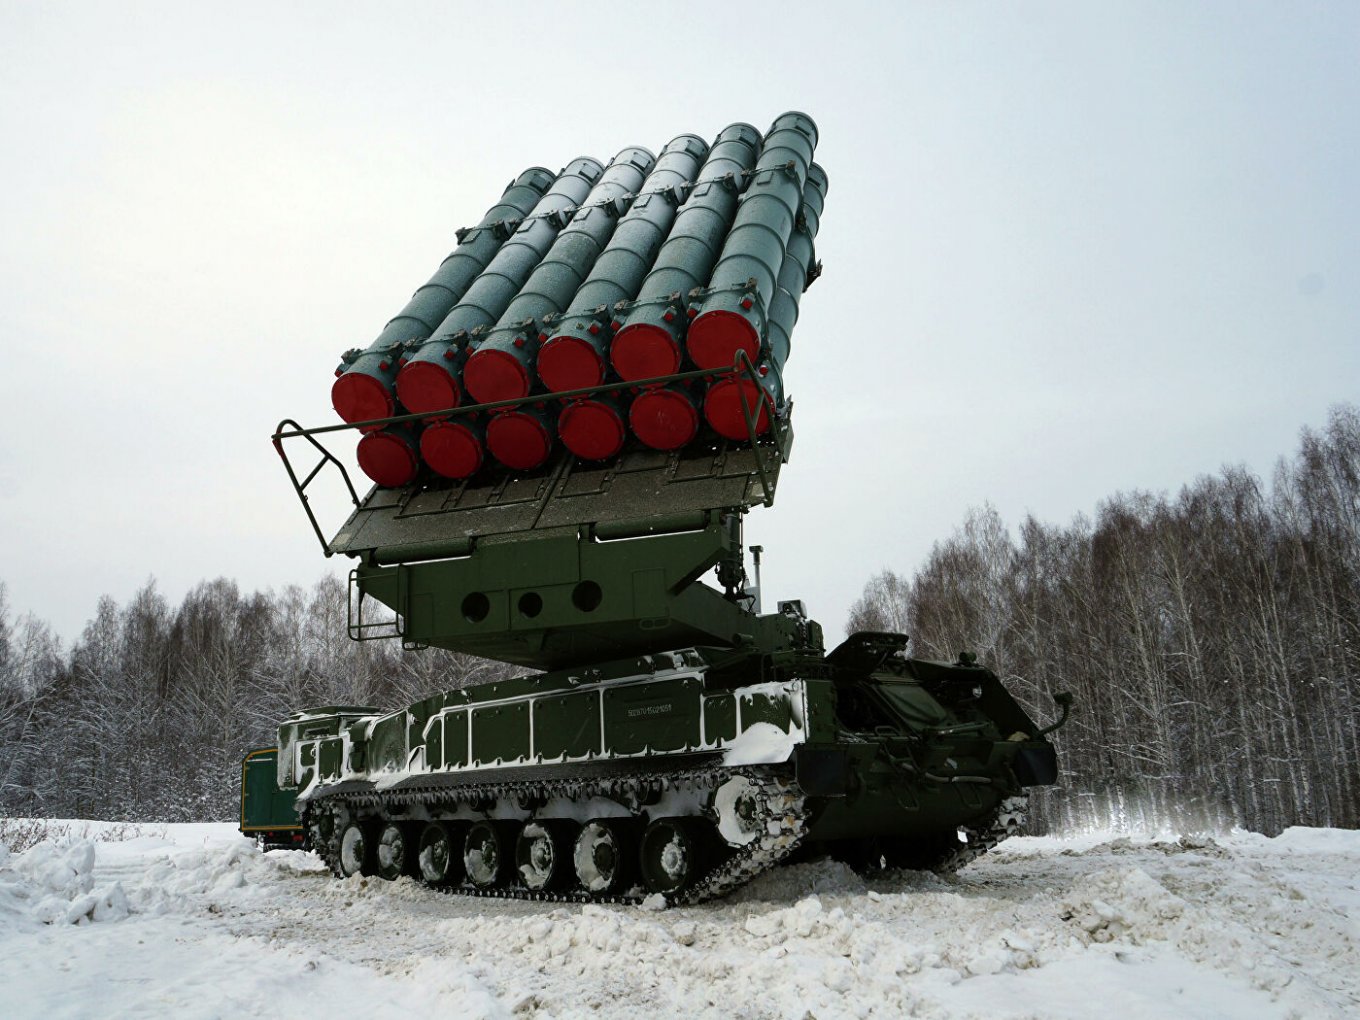 Buk-M3 is the latest version of the Buk missile system